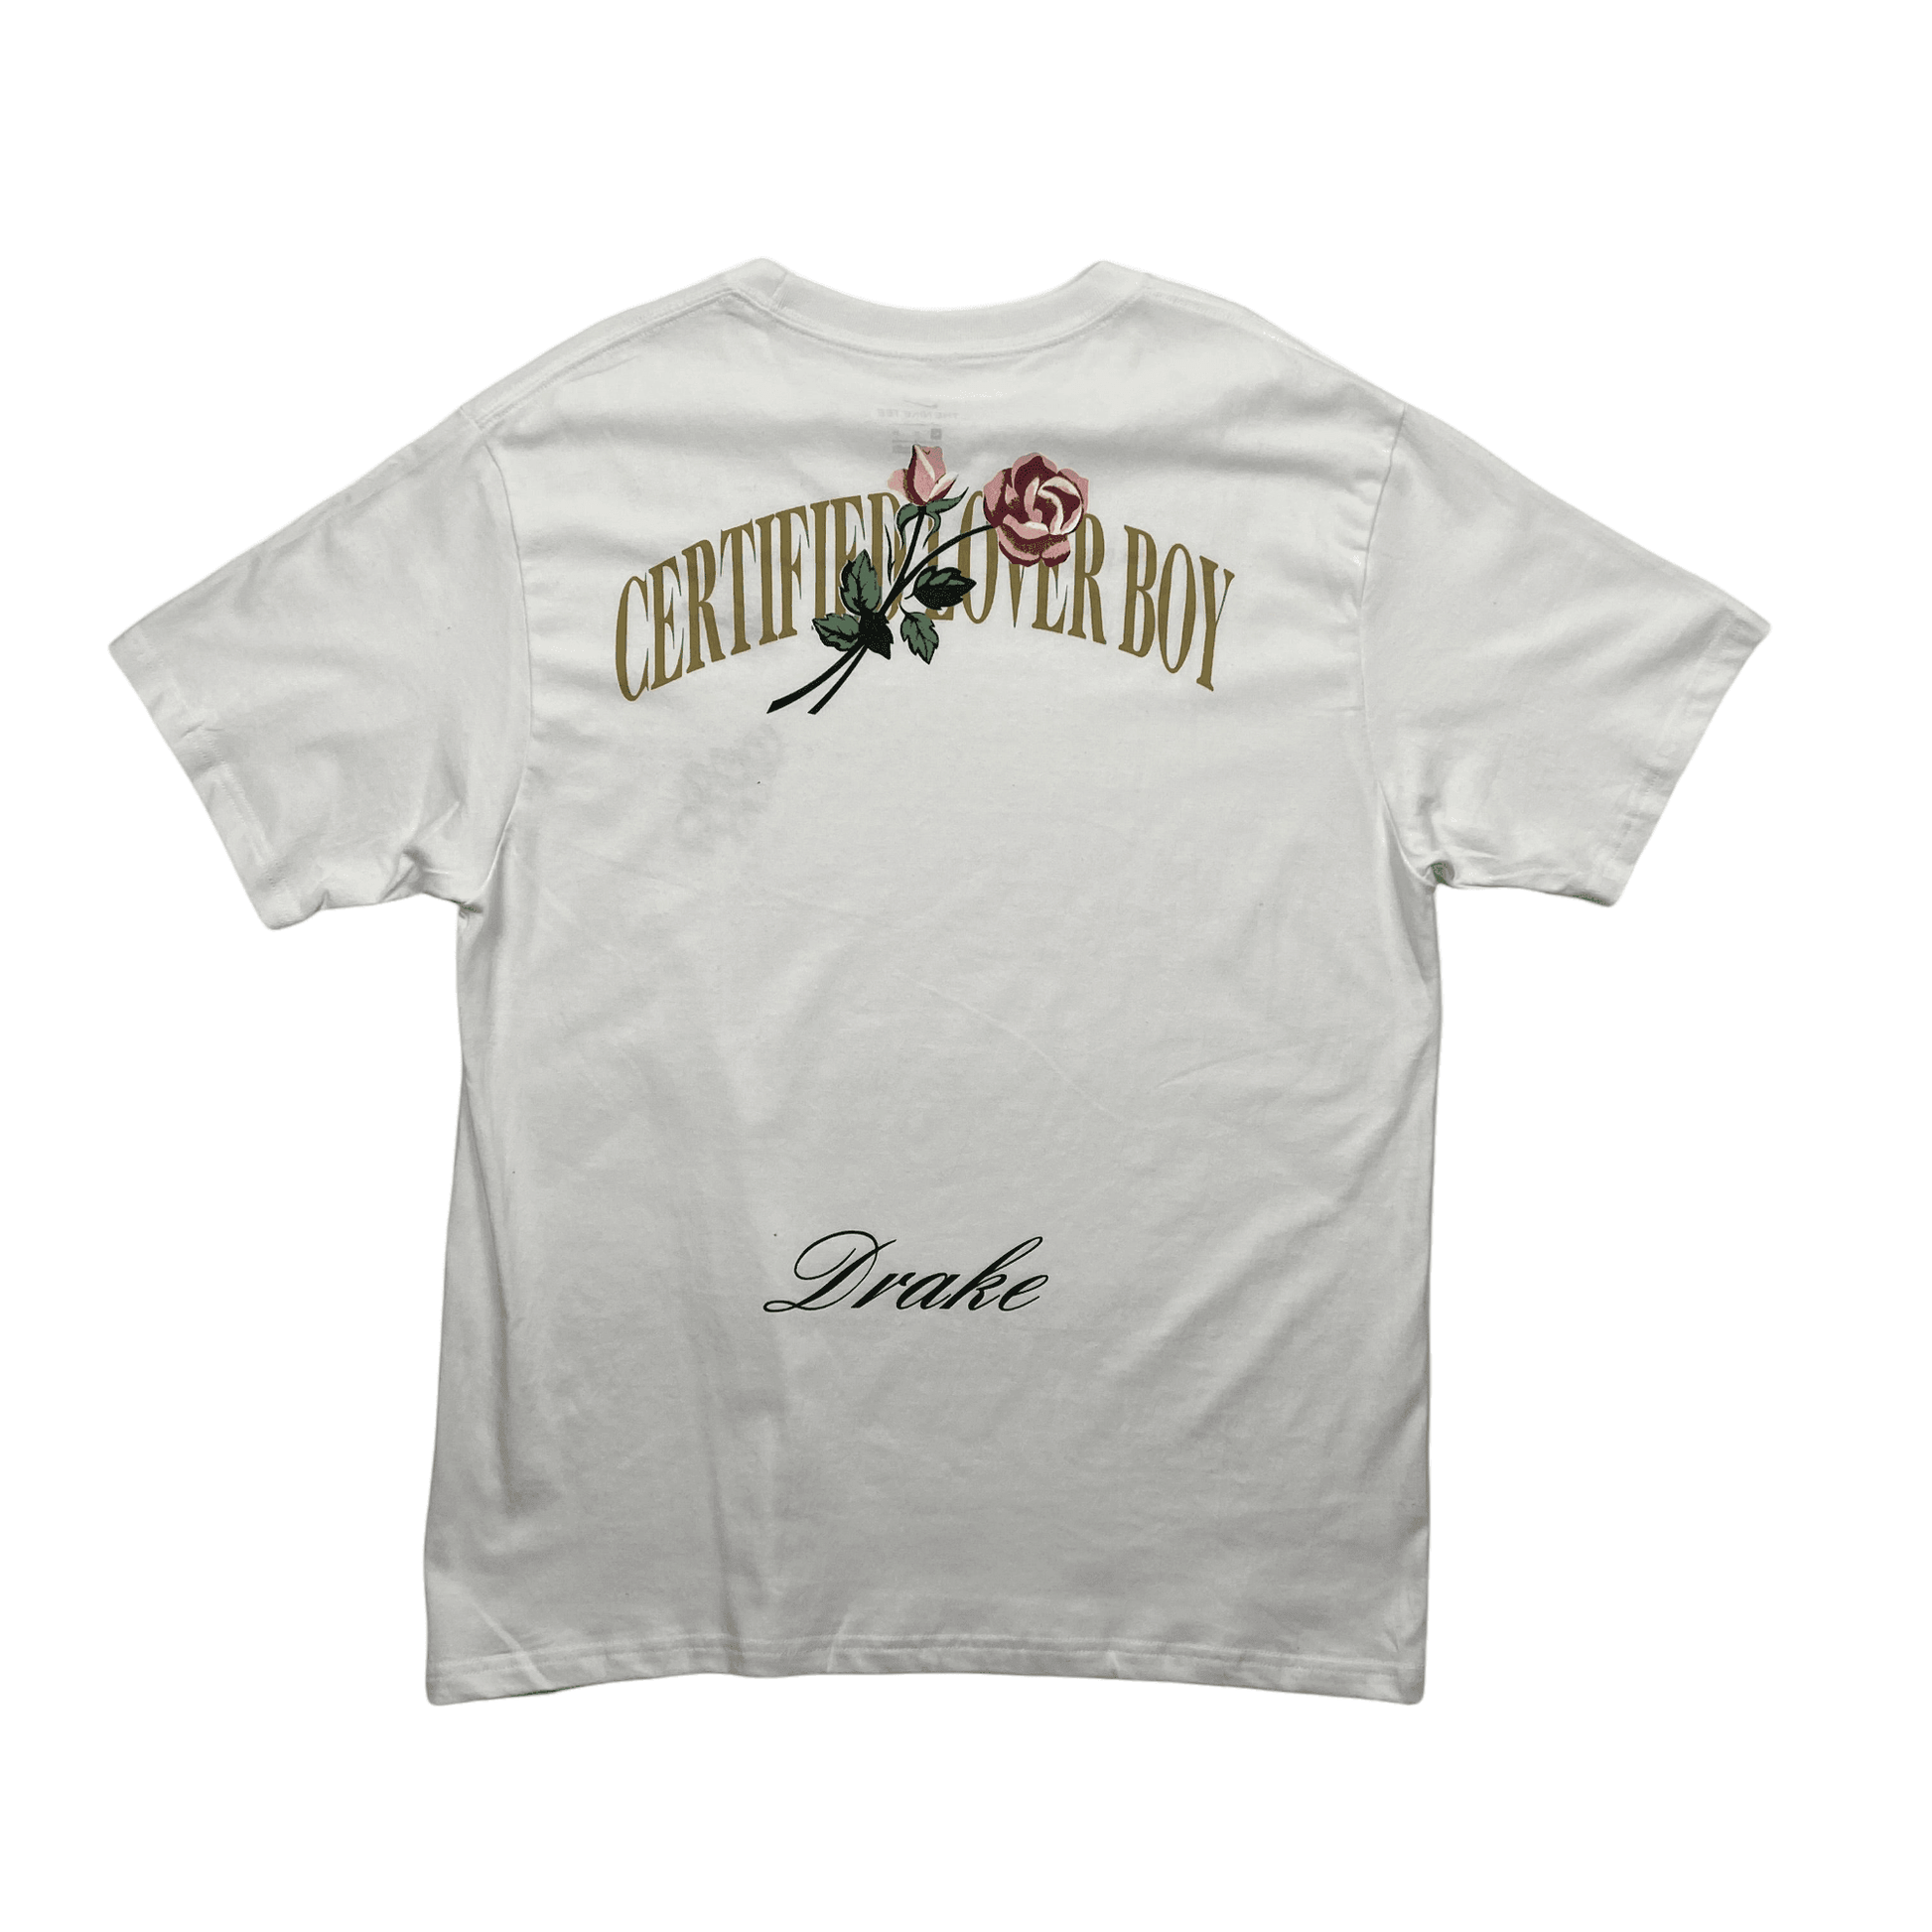 White Nike x Certified Lover Boy (CLB) Tee - Extra Large - The Streetwear Studio